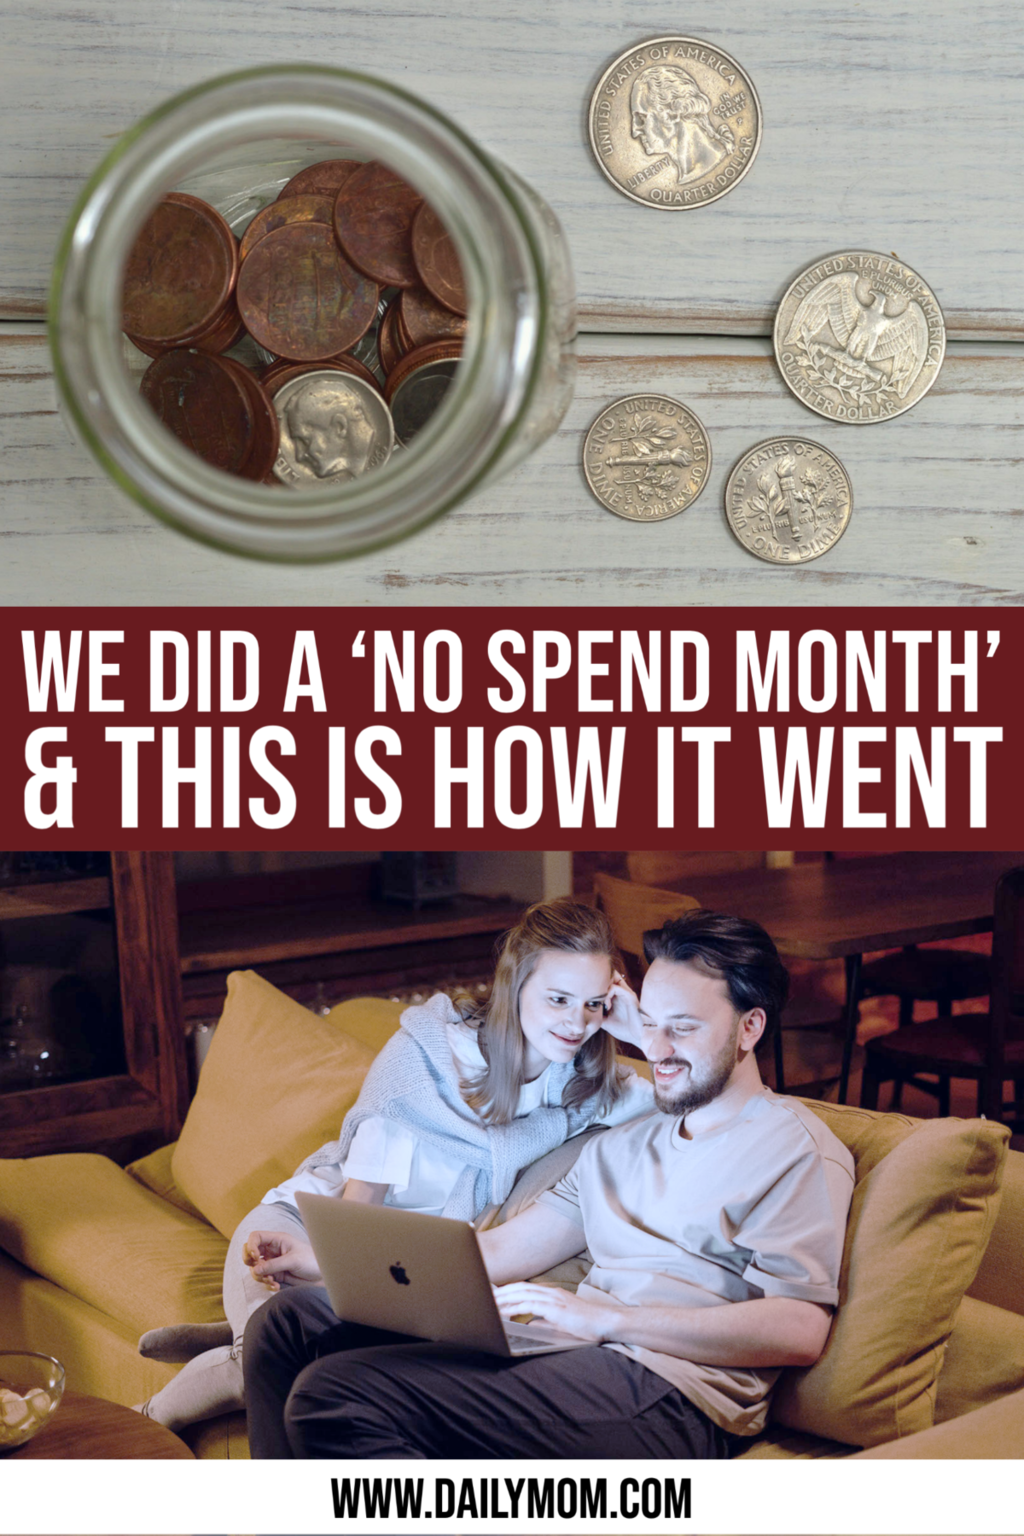 The Best Tips To Survive A “No Spend Month”